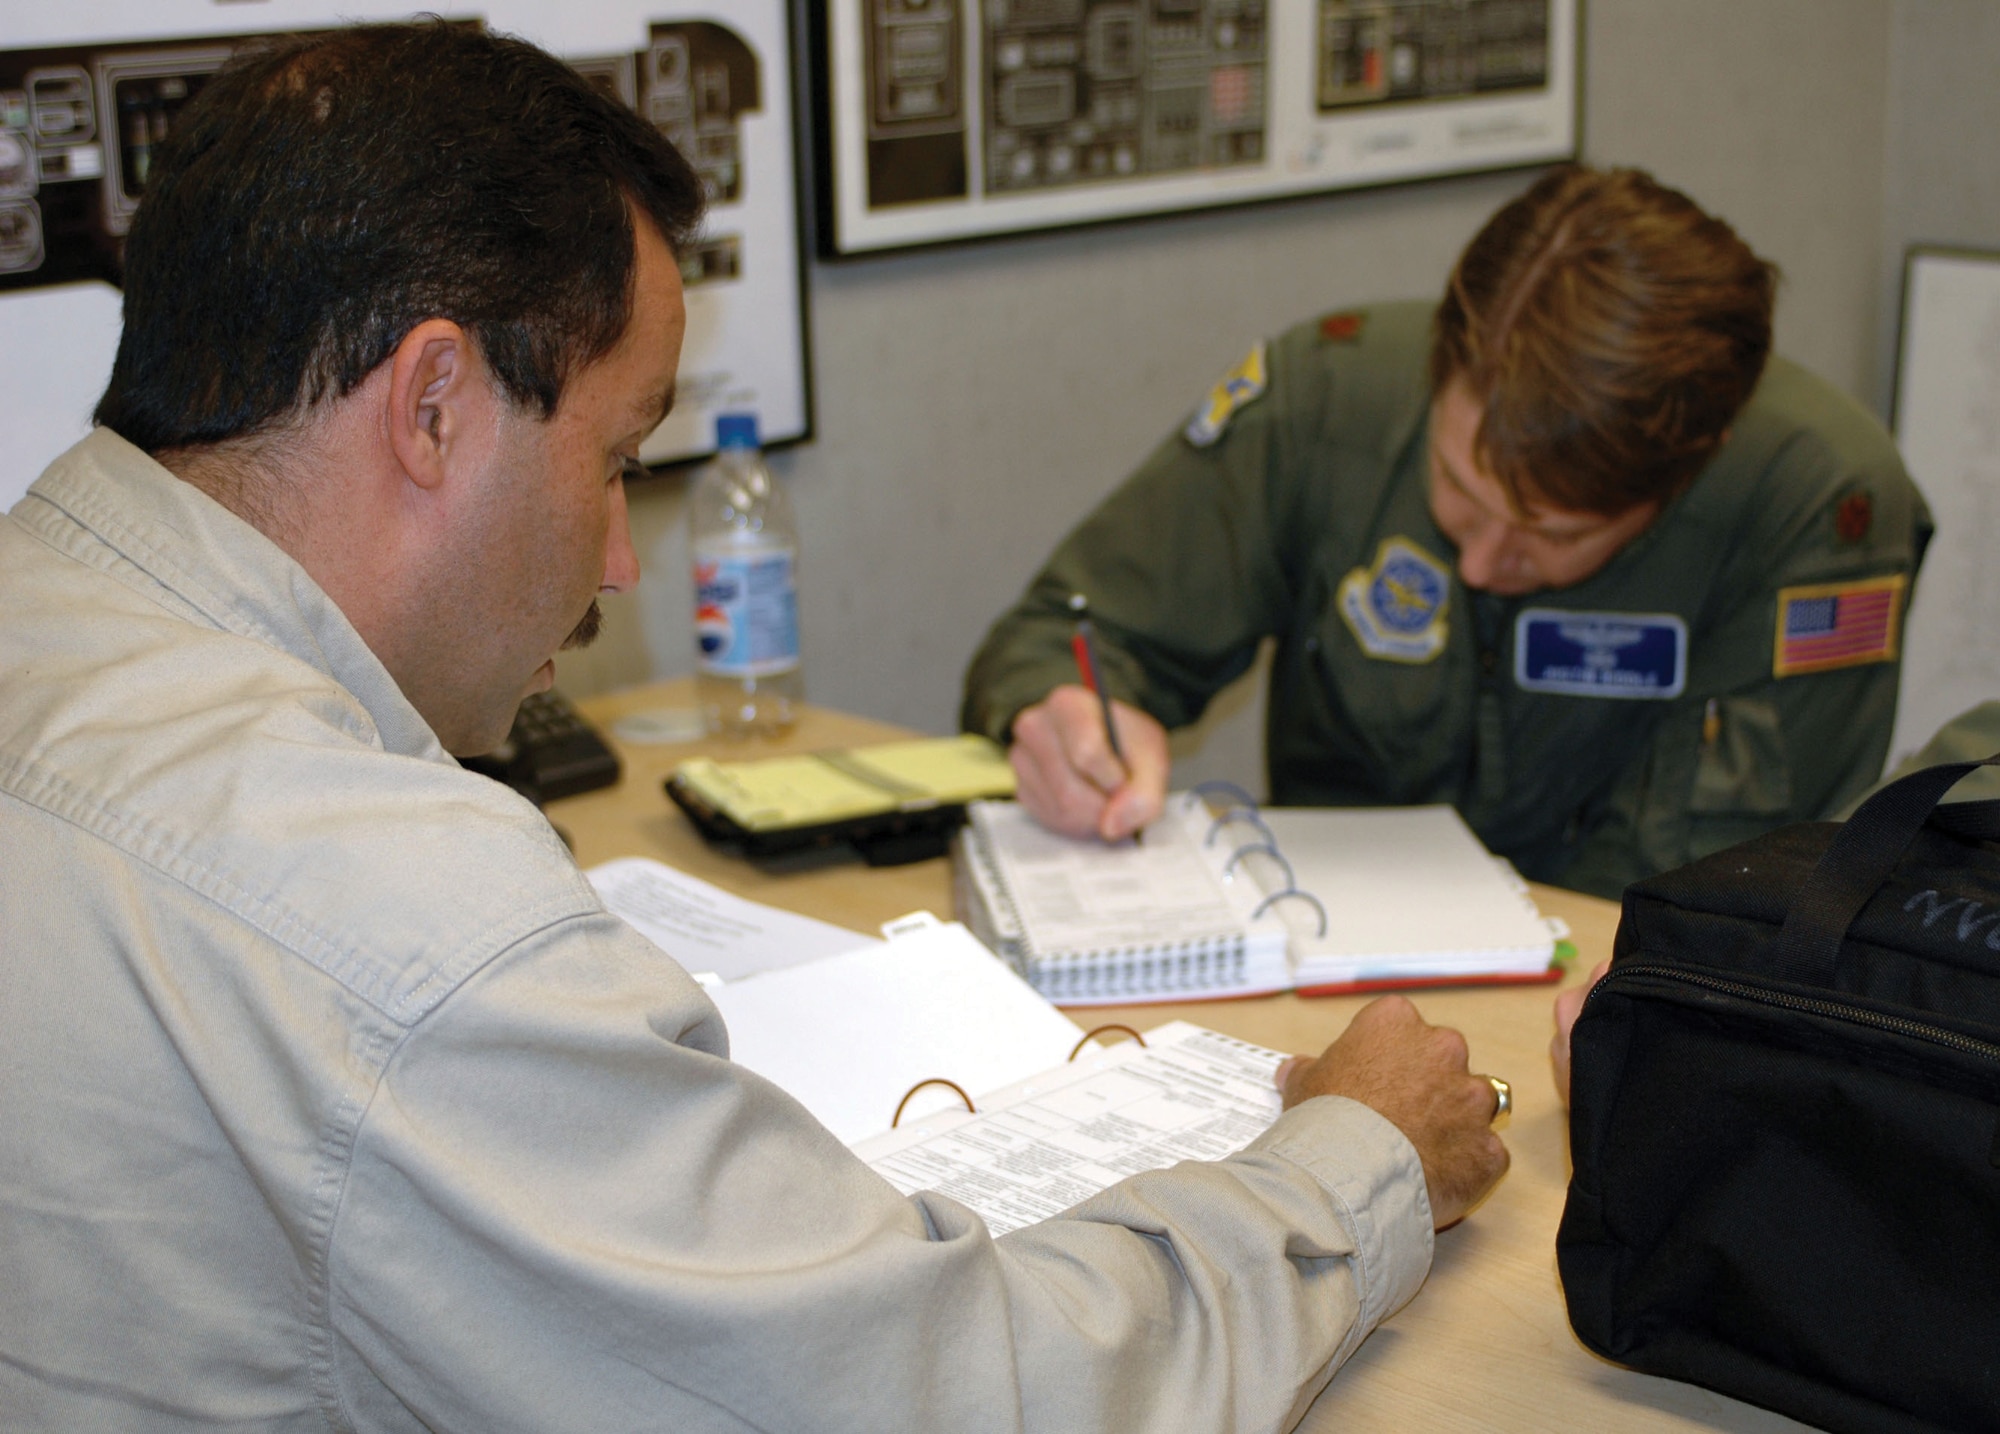 Pedro Ramos, a contracted  instructor for the C-17 simulator at McGuire Air Force Base, N.J., briefs Maj. Justin Riddle, 436th Airlift Wing pilot, on the operations they will be conducting during simulator training Nov. 2. Mr. Ramos is also a reserve pilot and major with the 512th Airlift Wing's 326th Airlift Squadron. The simulator session was part of an interfly agreement Nov. 1-5 with the 305th Air Mobility Wing, McGuire Air Force Base, N.J., to assist Dover Air Force Base with its training and transition to the C-17. (U.S. Air Force photo by 1st Lt. Marnee A.C. Losurdo)
